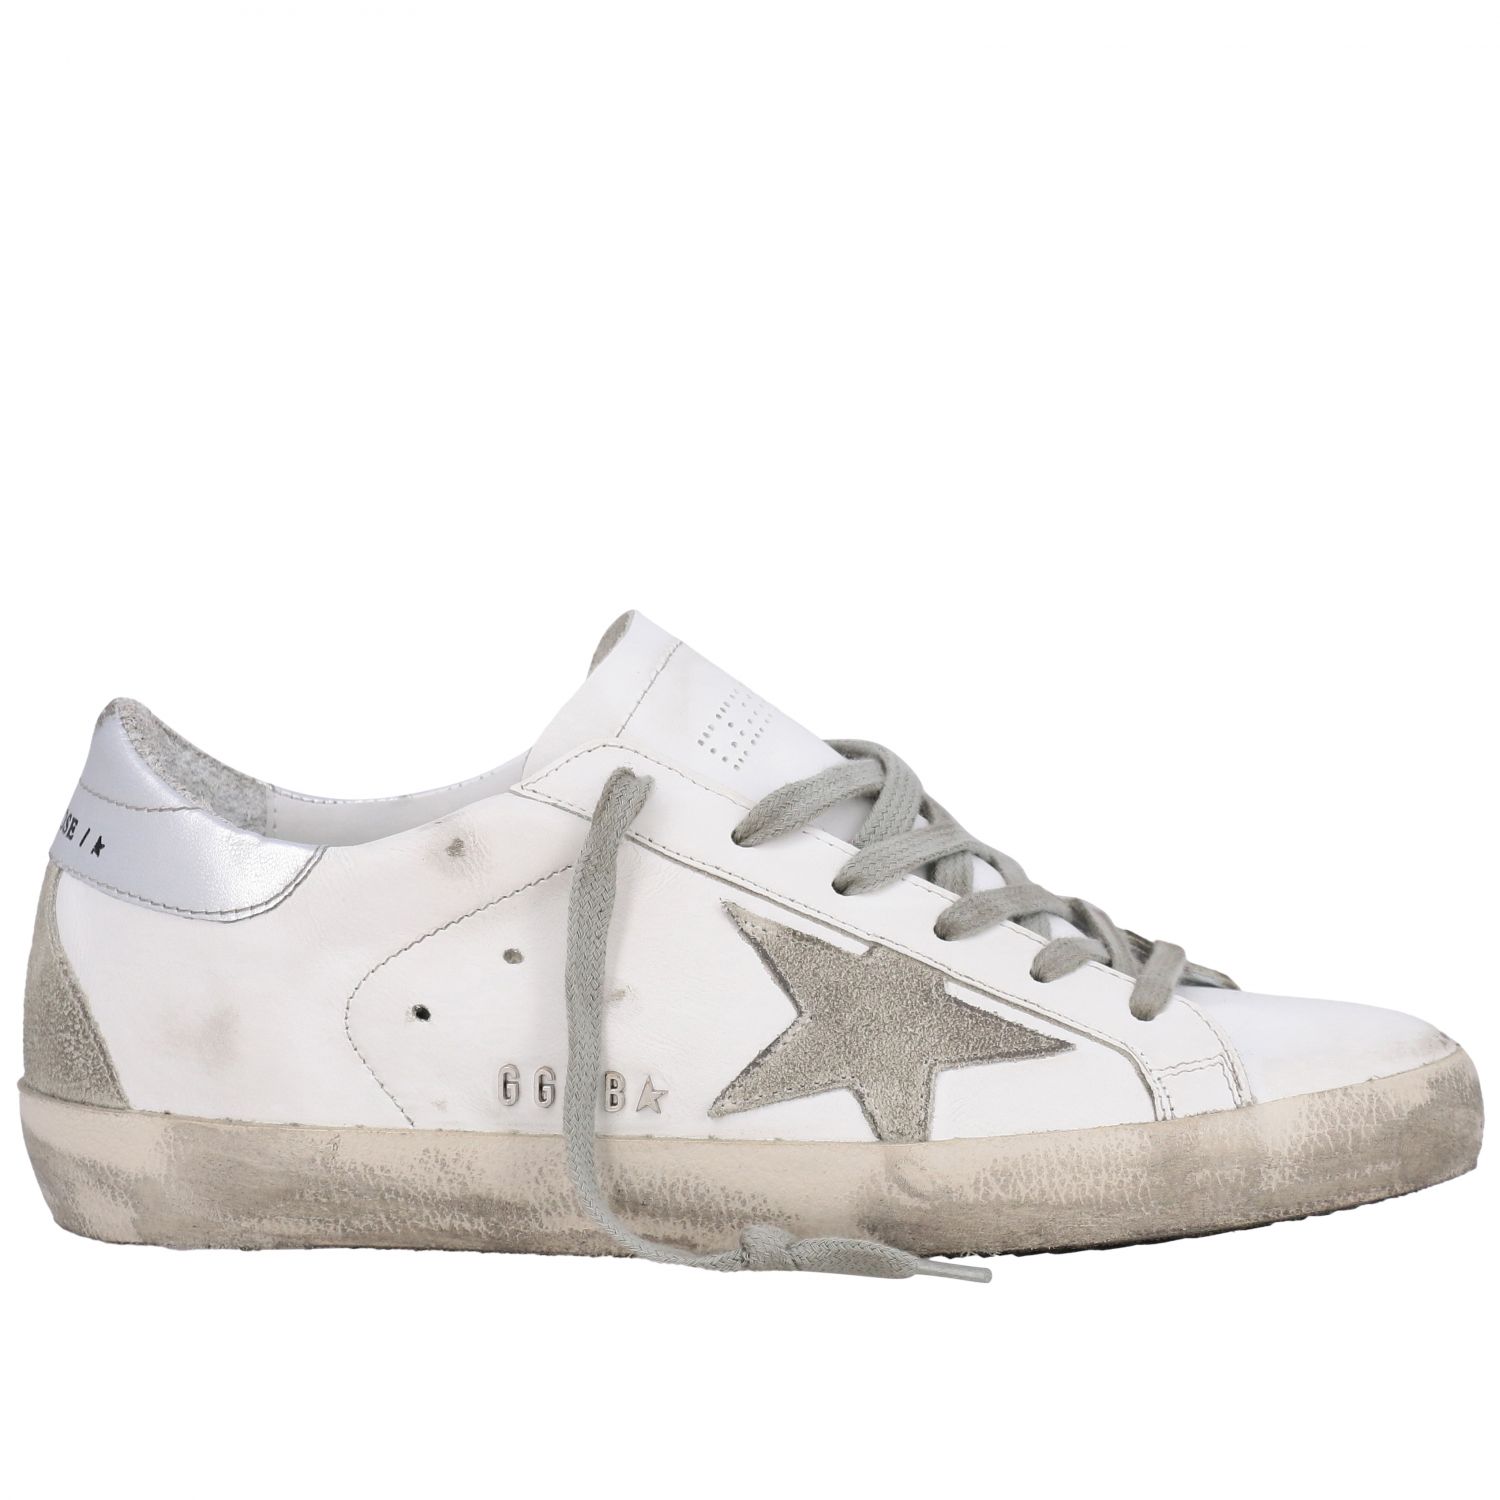 GOLDEN GOOSE: Superstar leather sneakers with star - White | Golden ...